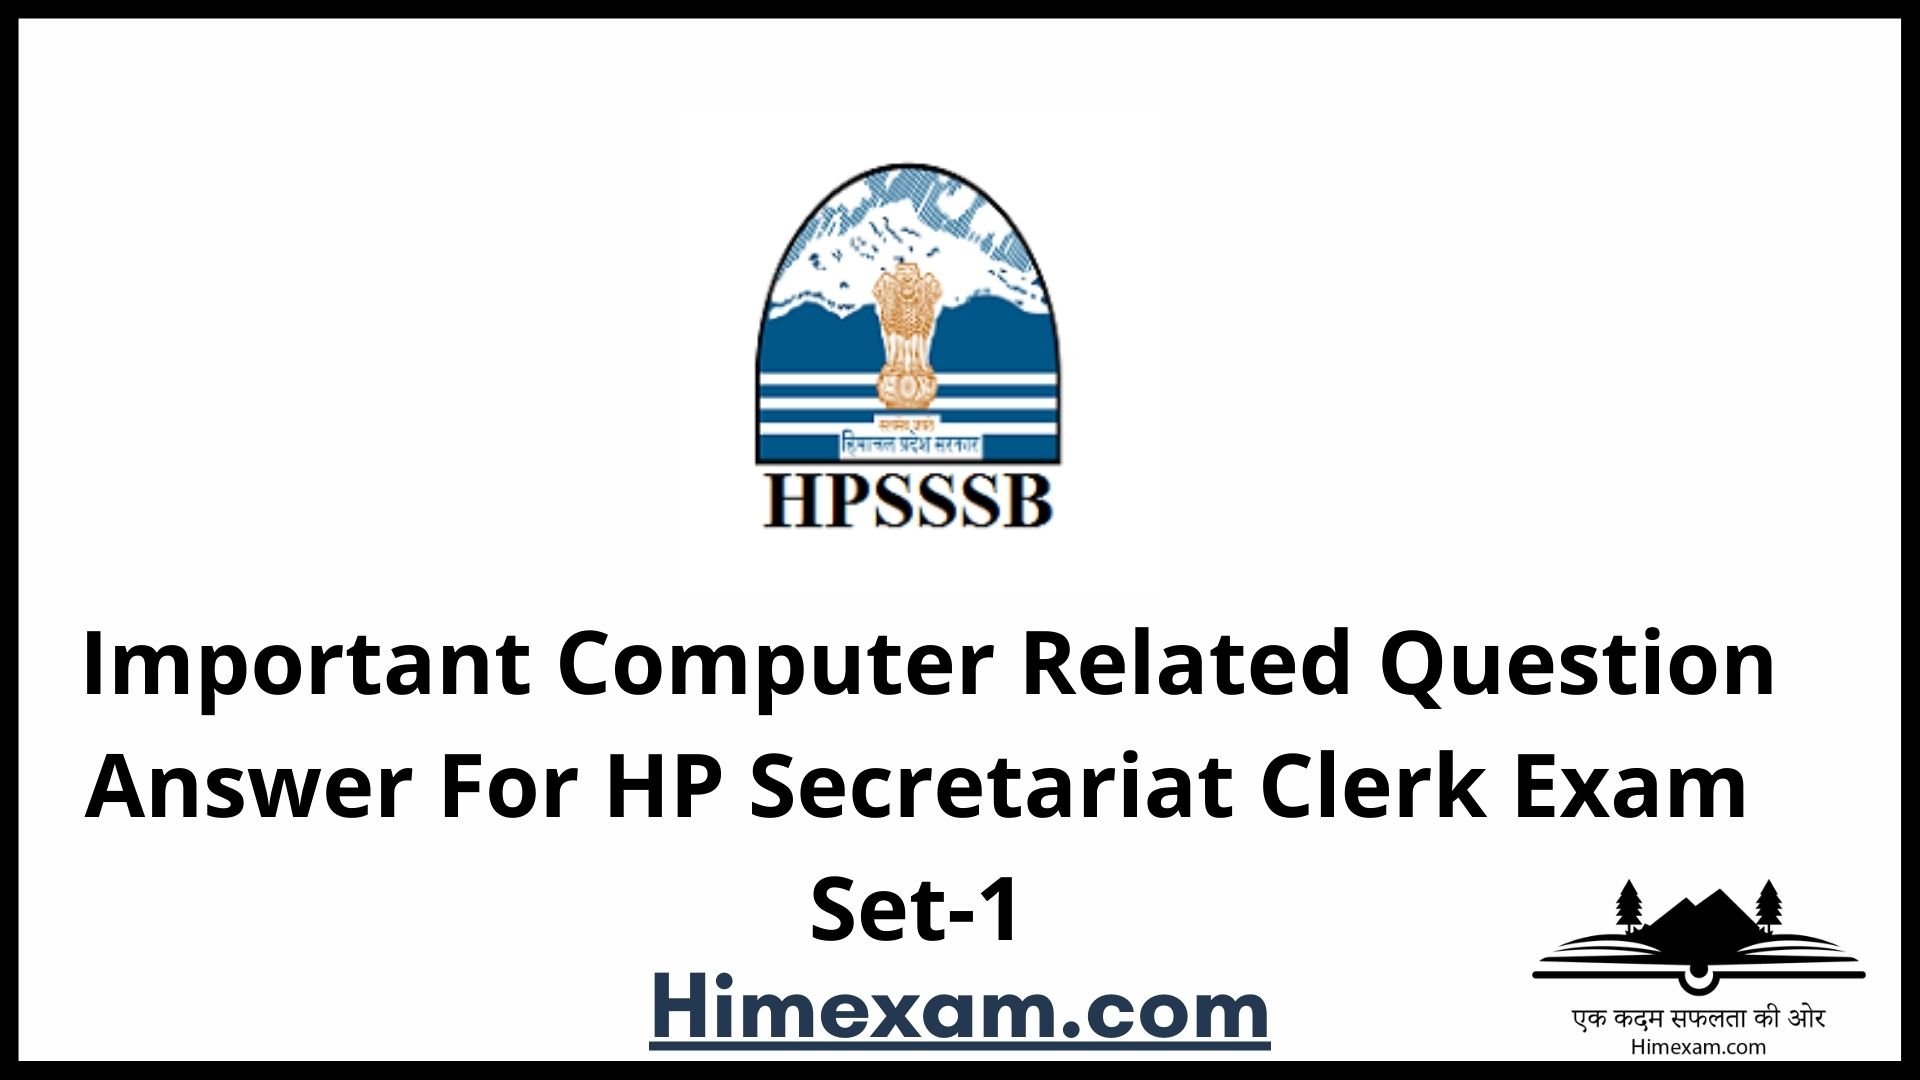 Important Computer Related Question Answer For HP Secretariat Clerk Exam Set-1